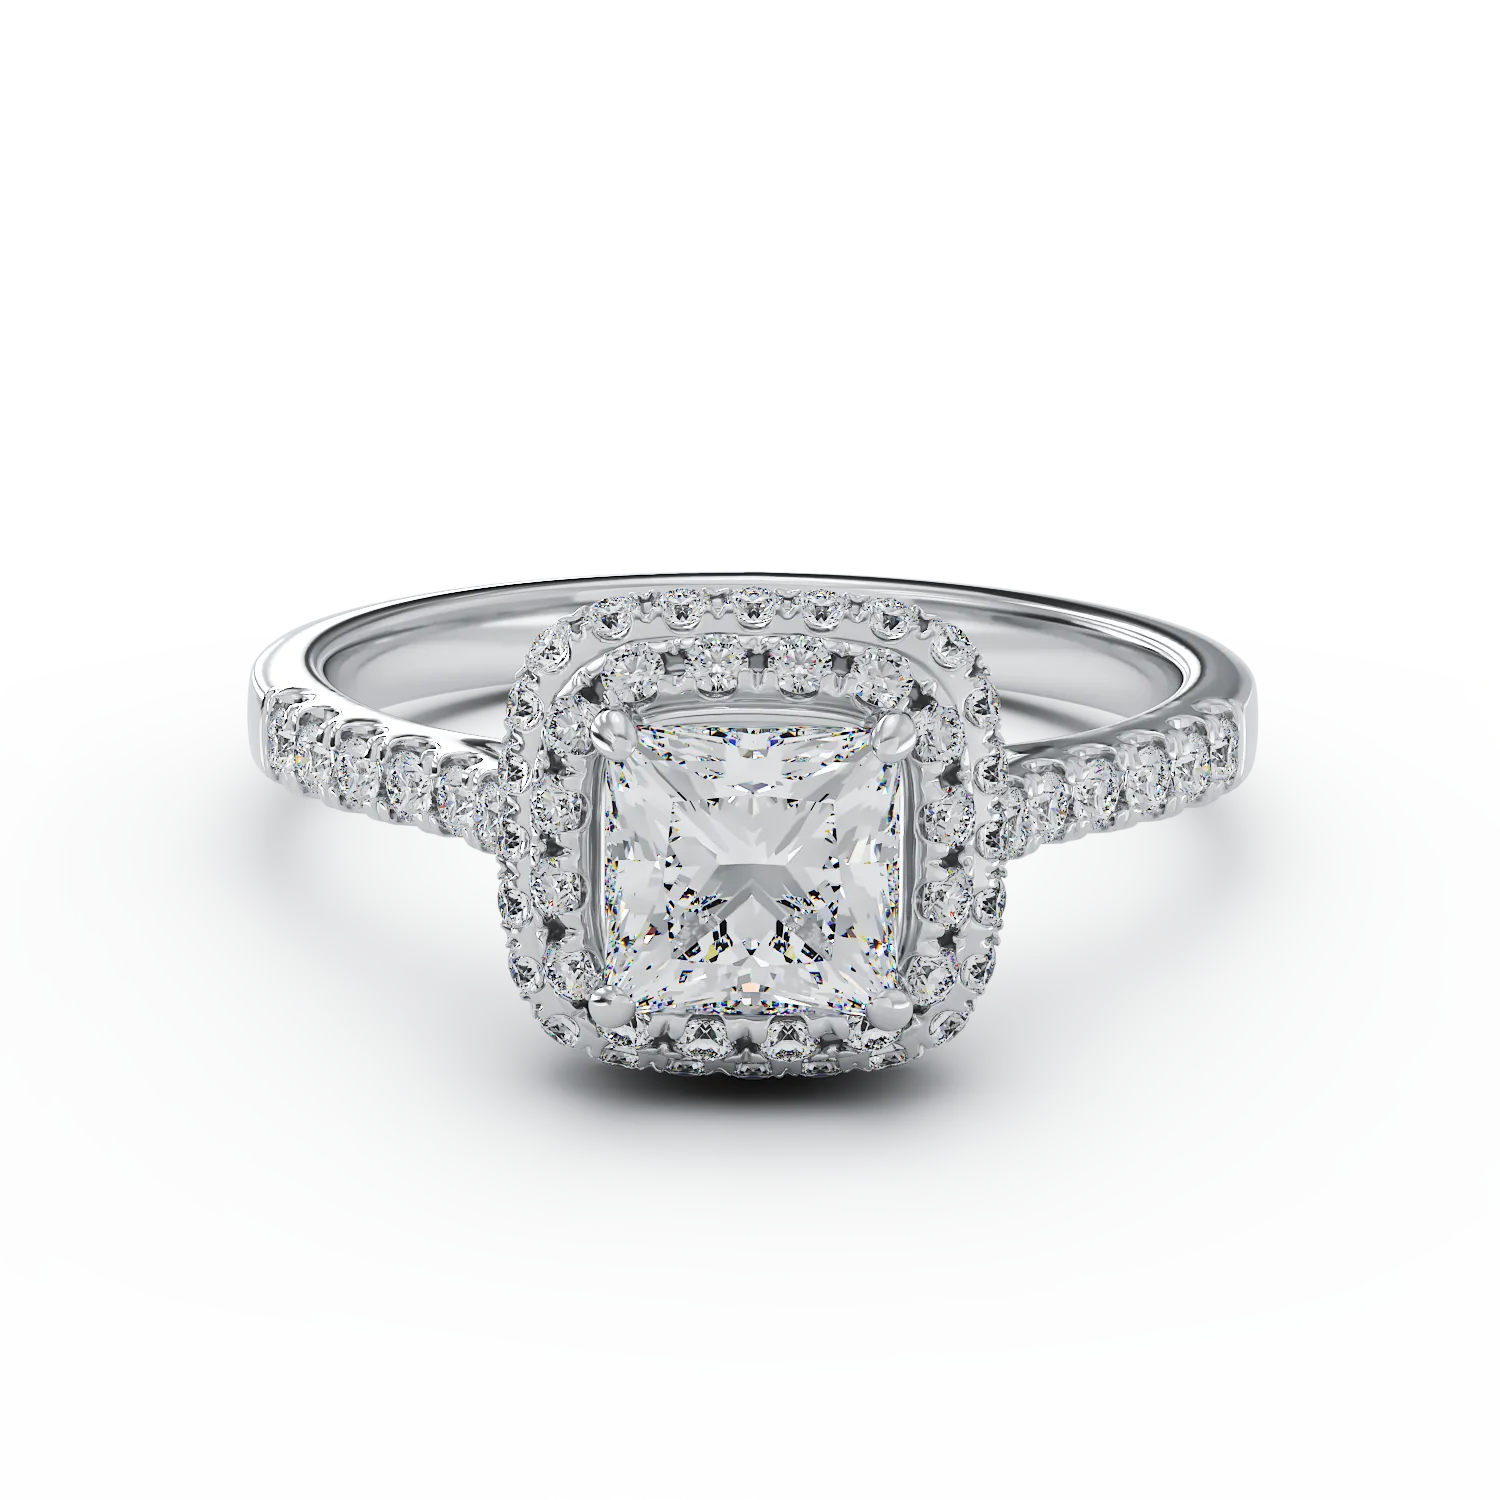 18K white gold engagement ring with 1.01ct diamond and 0.39ct diamonds